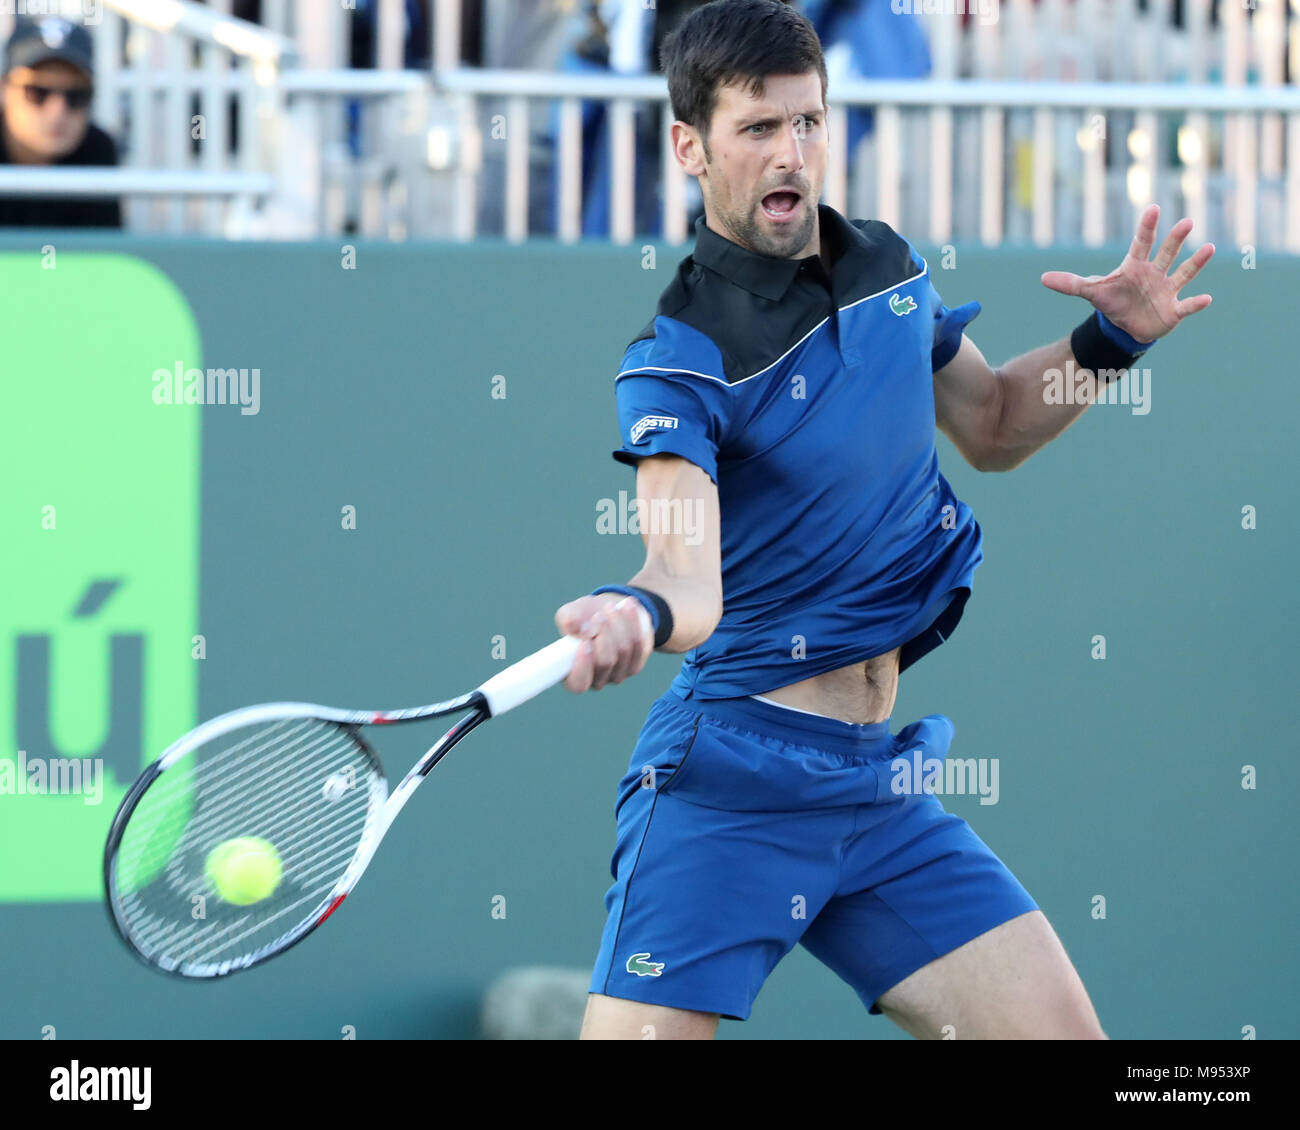 KEY BISCAYNE, FL - MARCH 22: Novak Djokovic during Day 4 of the Miami Open  at the Crandon Park Tennis Center on March 22, 2018 in Key Biscayne,  Florida People: Novak Djokovic